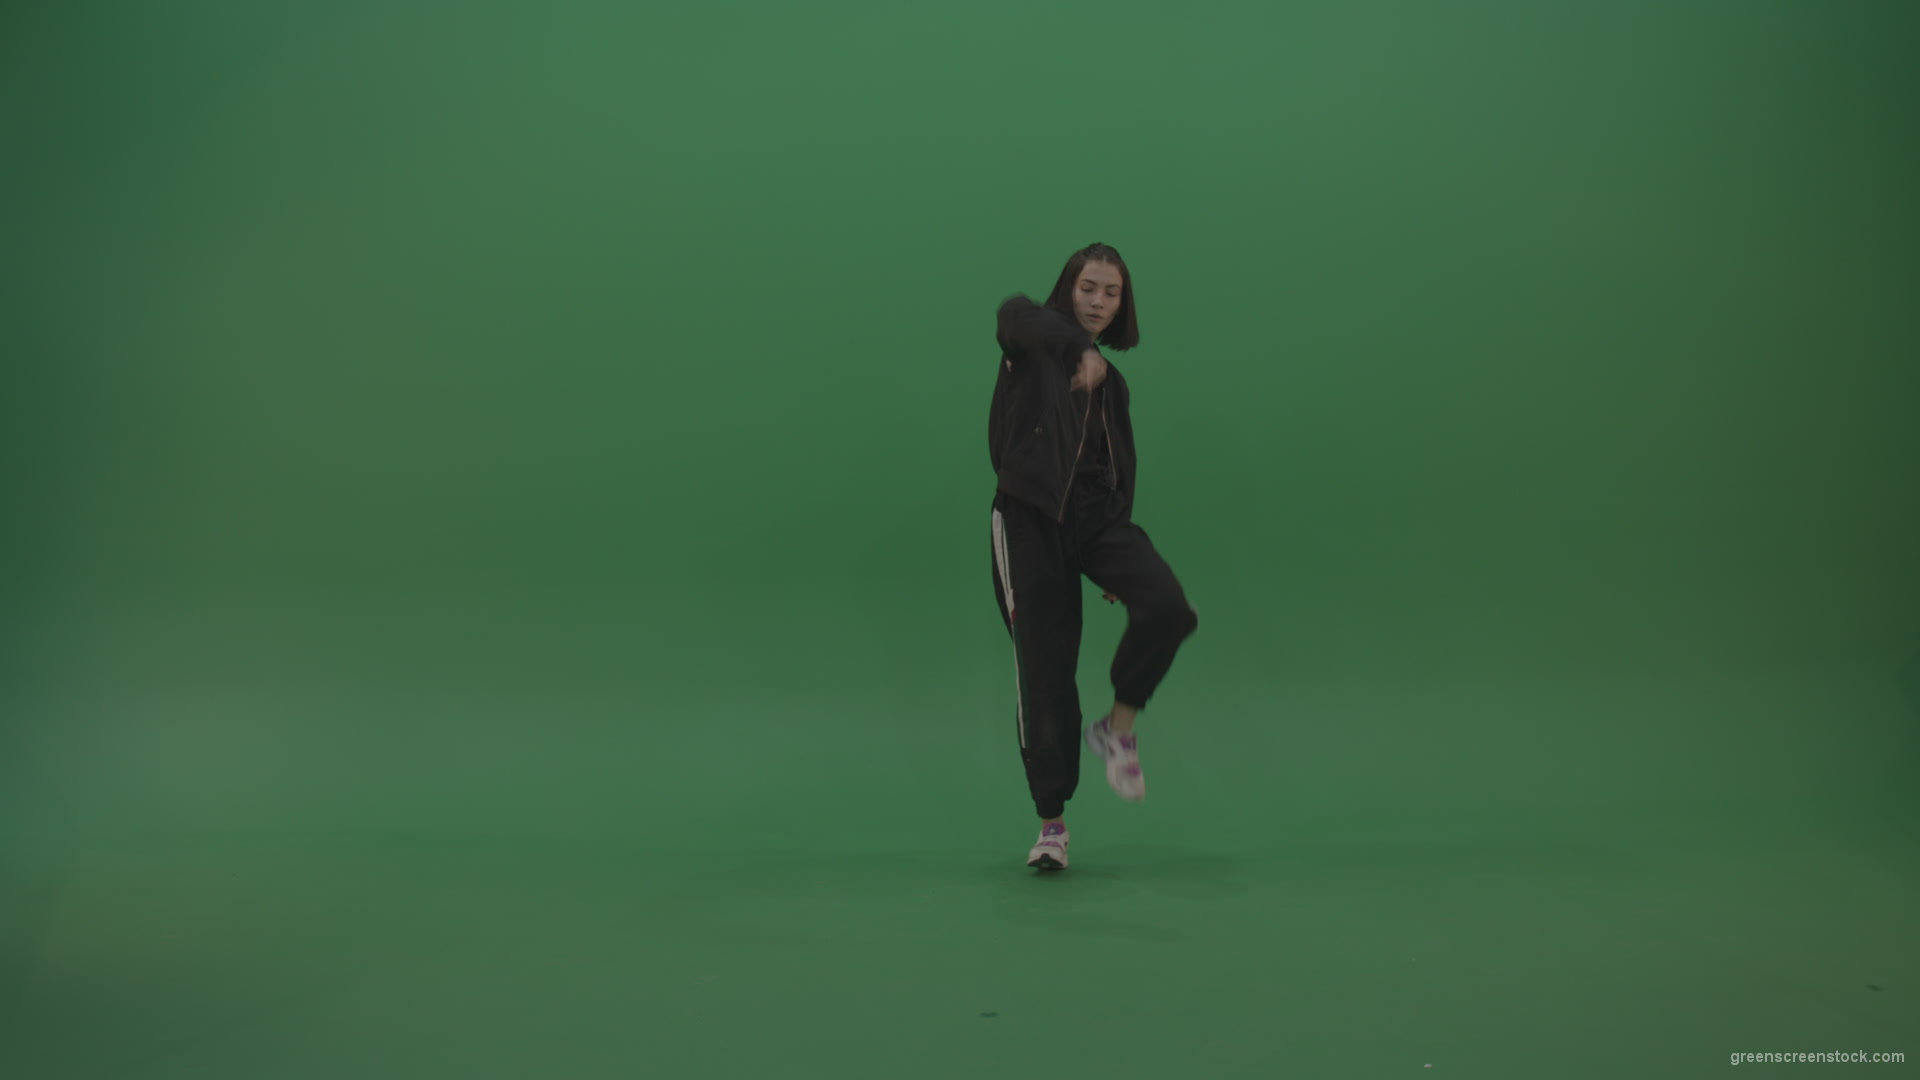 Incredible_Dance_Hip_Hop_Moves_From_Young_Brunette_Female_Wearing_Black_Sweat_Suite_And_White_Trainers_On_Green_Screen_Wall_Background_005 Green Screen Stock